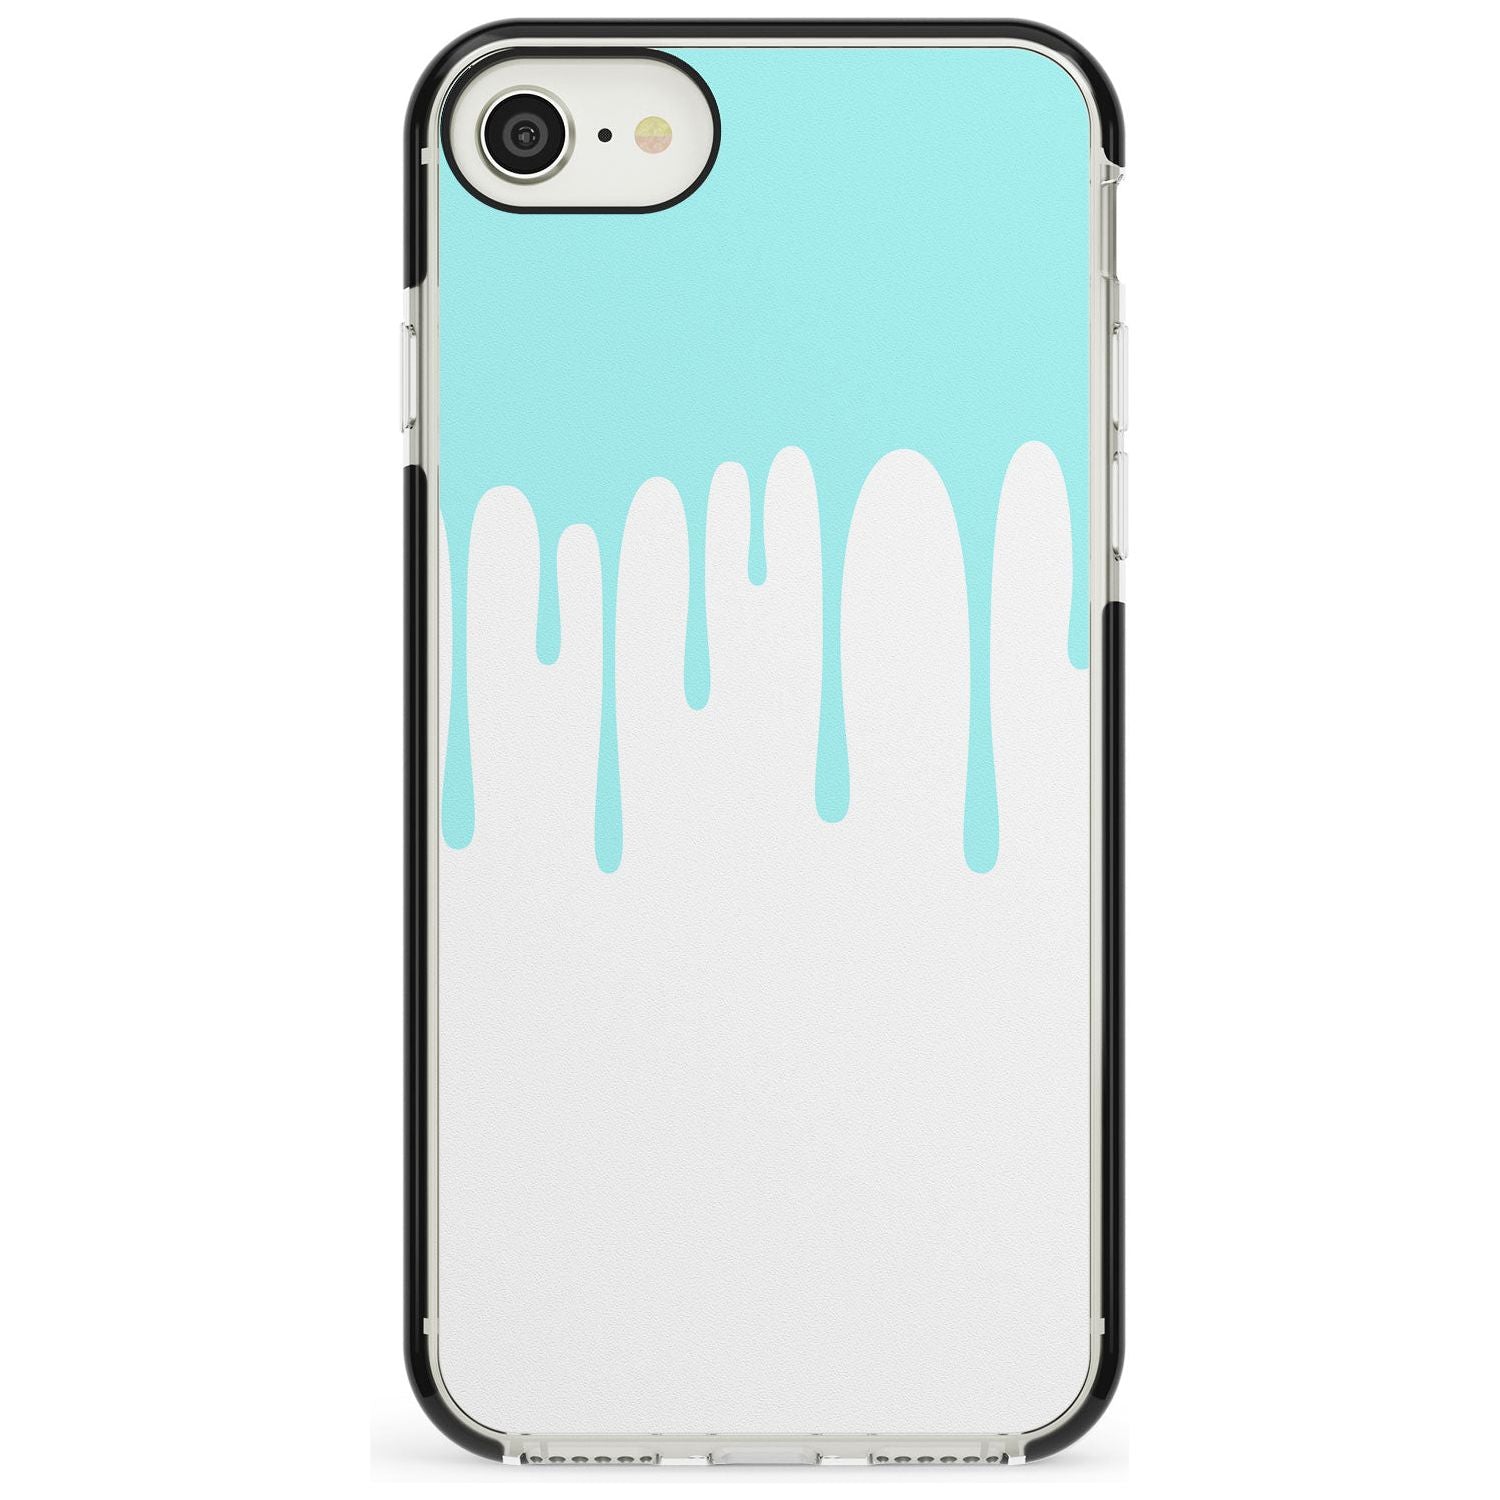 Melted Effect: Teal & White iPhone Case Black Impact Phone Case Warehouse SE 8 7 Plus